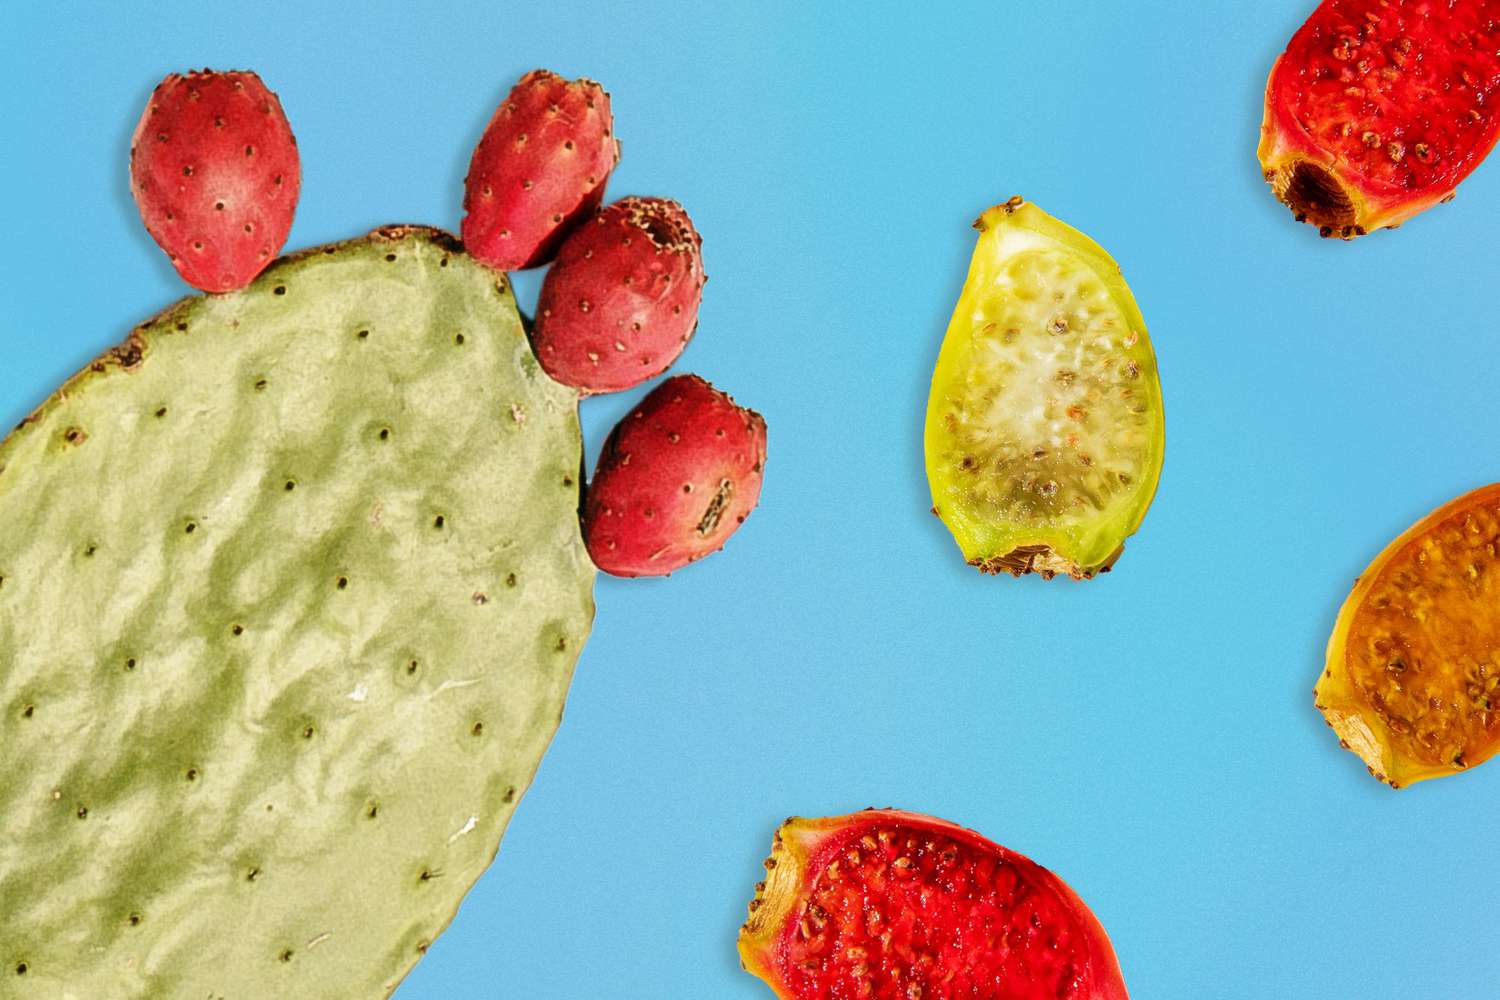 Prickly Pear Cactus leaf with red buds and colorful cactus pear buds sliced open